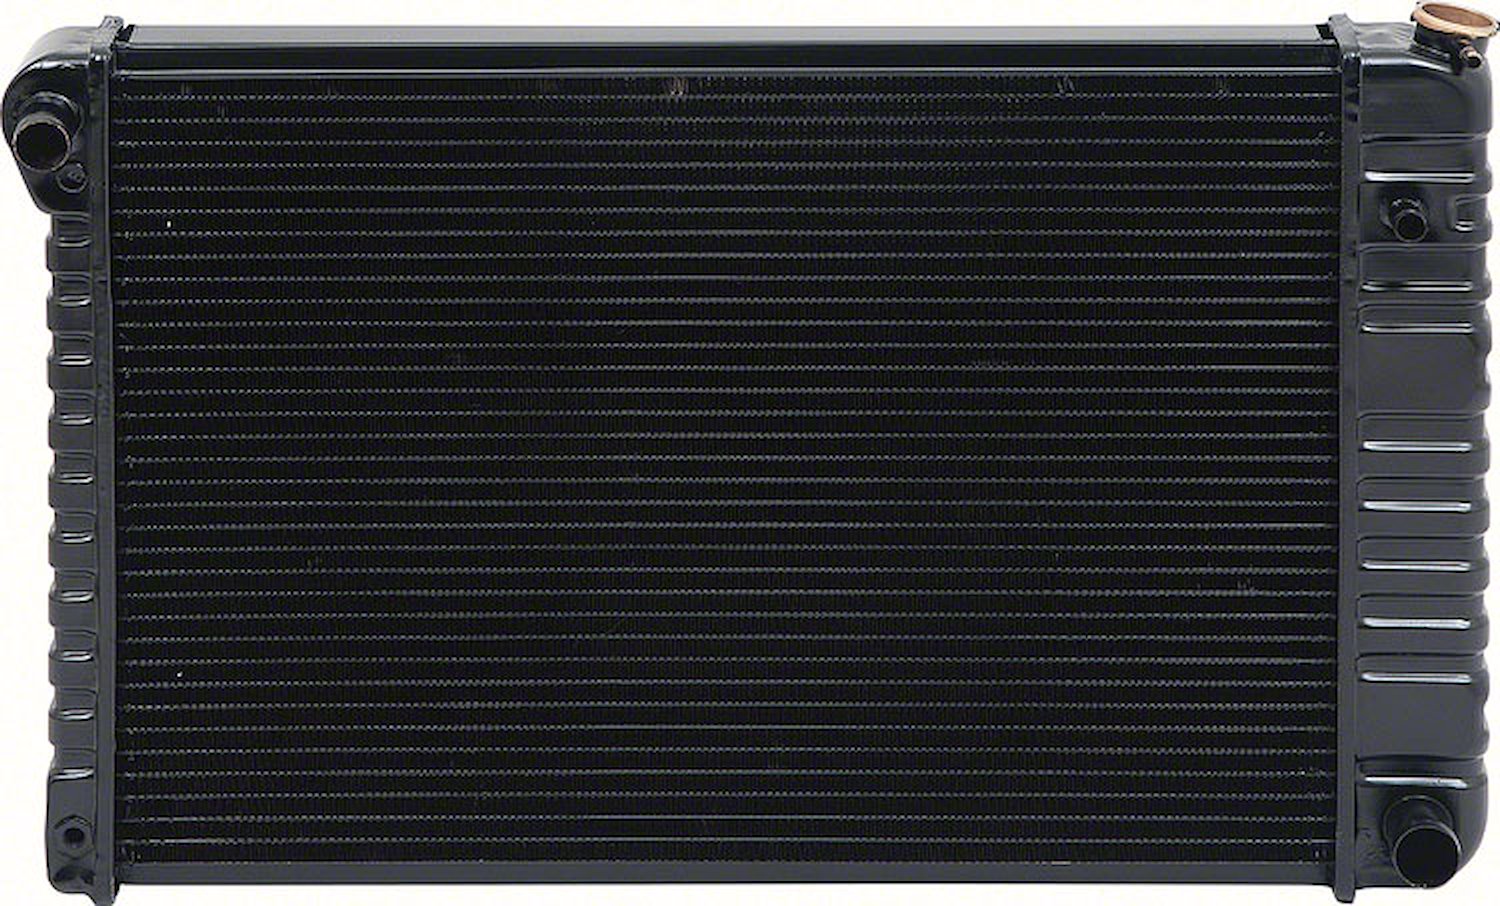 CRD1782S Radiator 1978-80 Chevrolet Truck L6 With MT 3 Row Copper/Brass (17" x 28-3/8" x 2" Core)